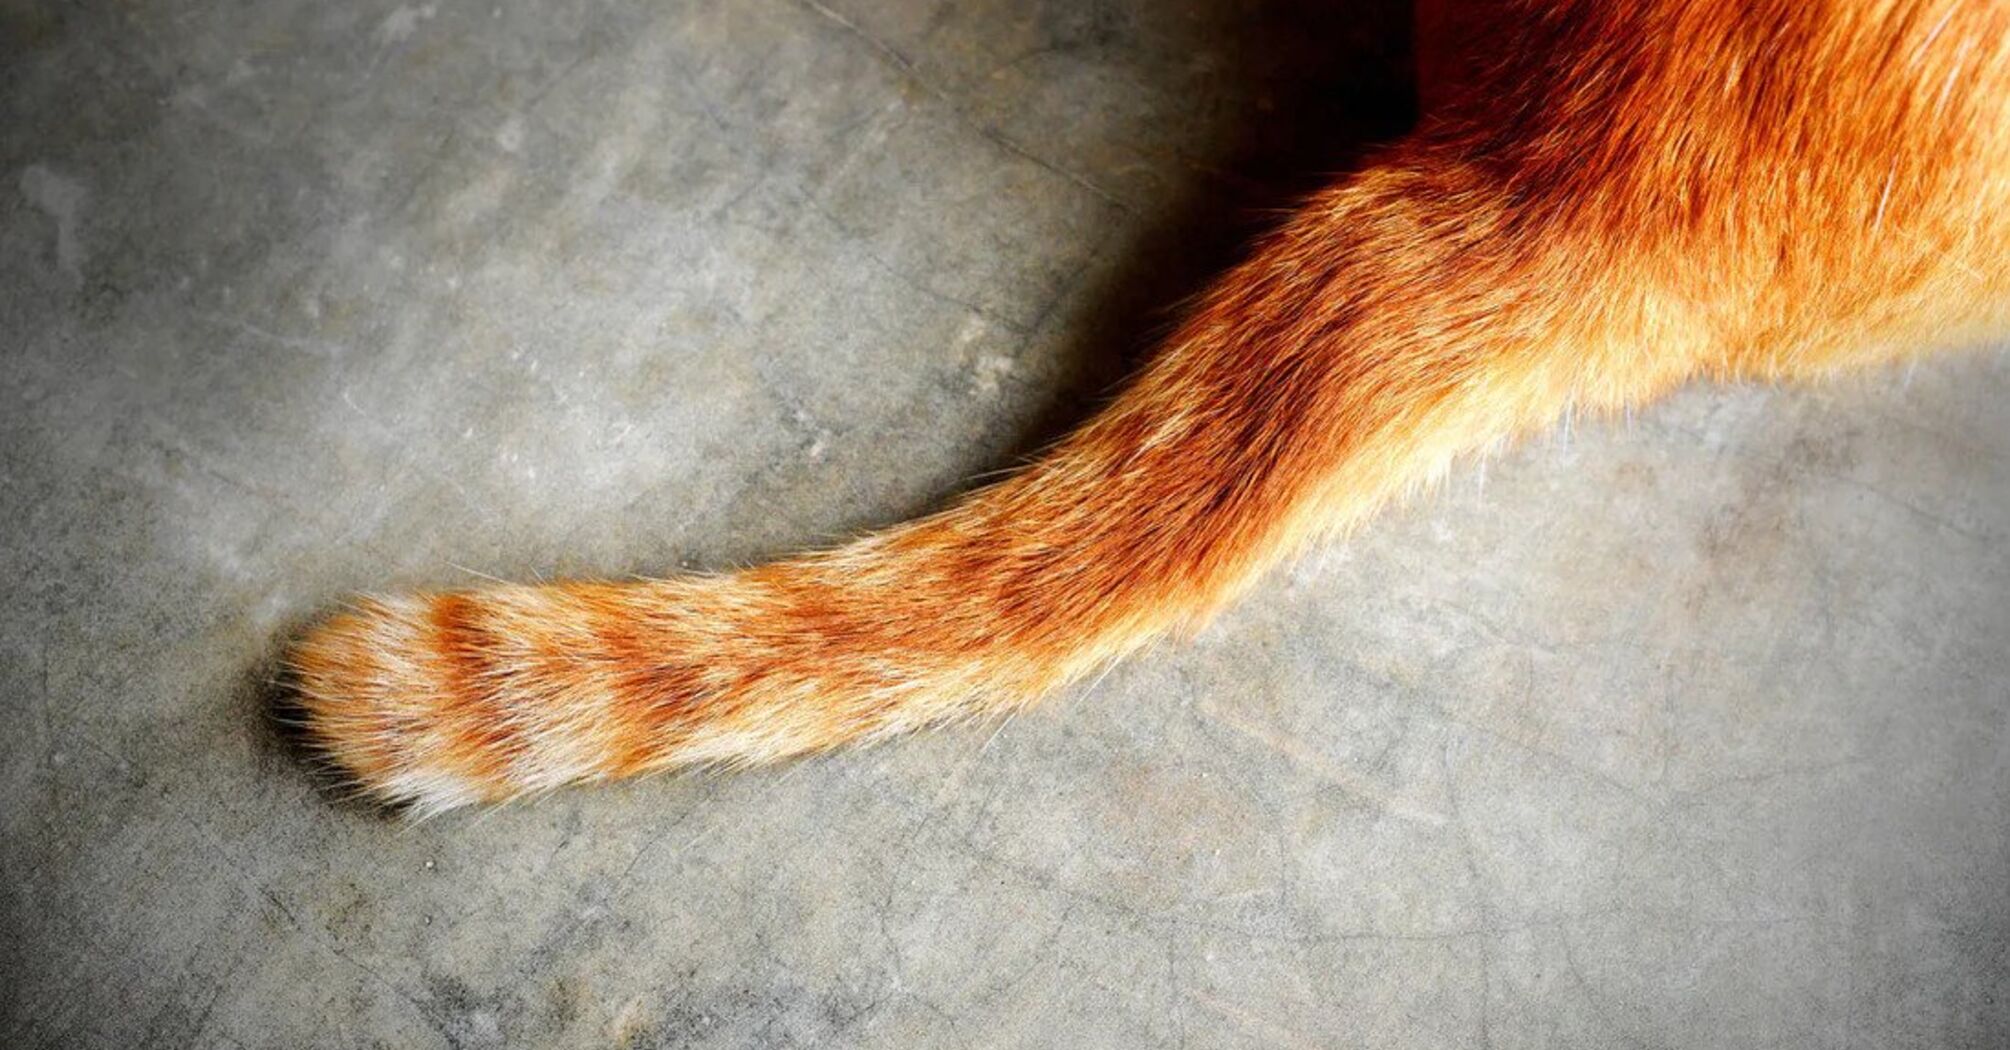 How the tail signals health problems in a cat